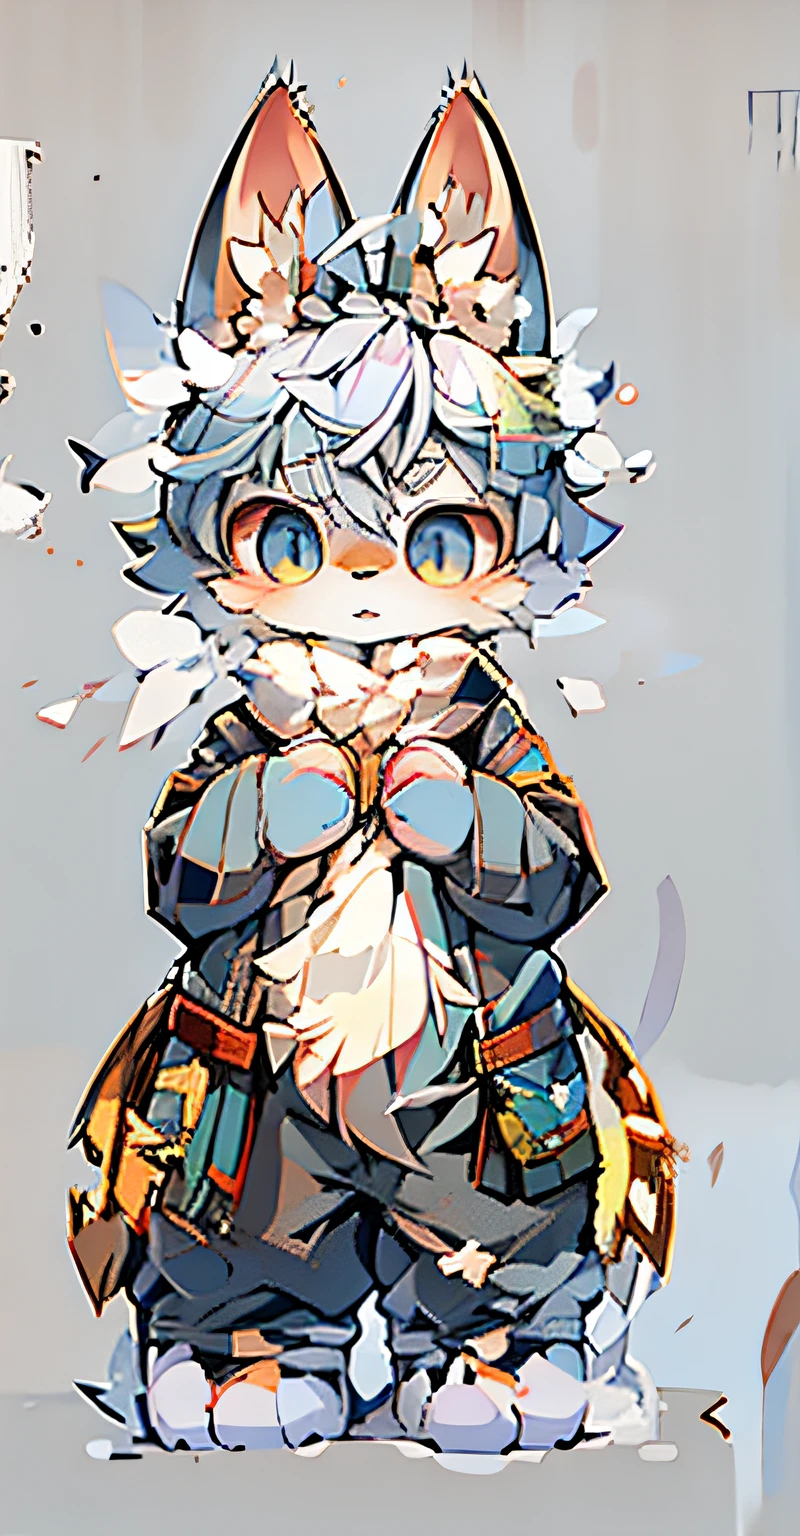 there is a cat that is standing on a window sill, an anime portrait of cirno, cirno, cirno touhou, nyaruko-san, Official artwork, Detailed fanart, killua zoldyck, cirno from touhou, zerochan art, neferpitou, by Kamagurka, Sora as a cat, author：Master of Han Chinese